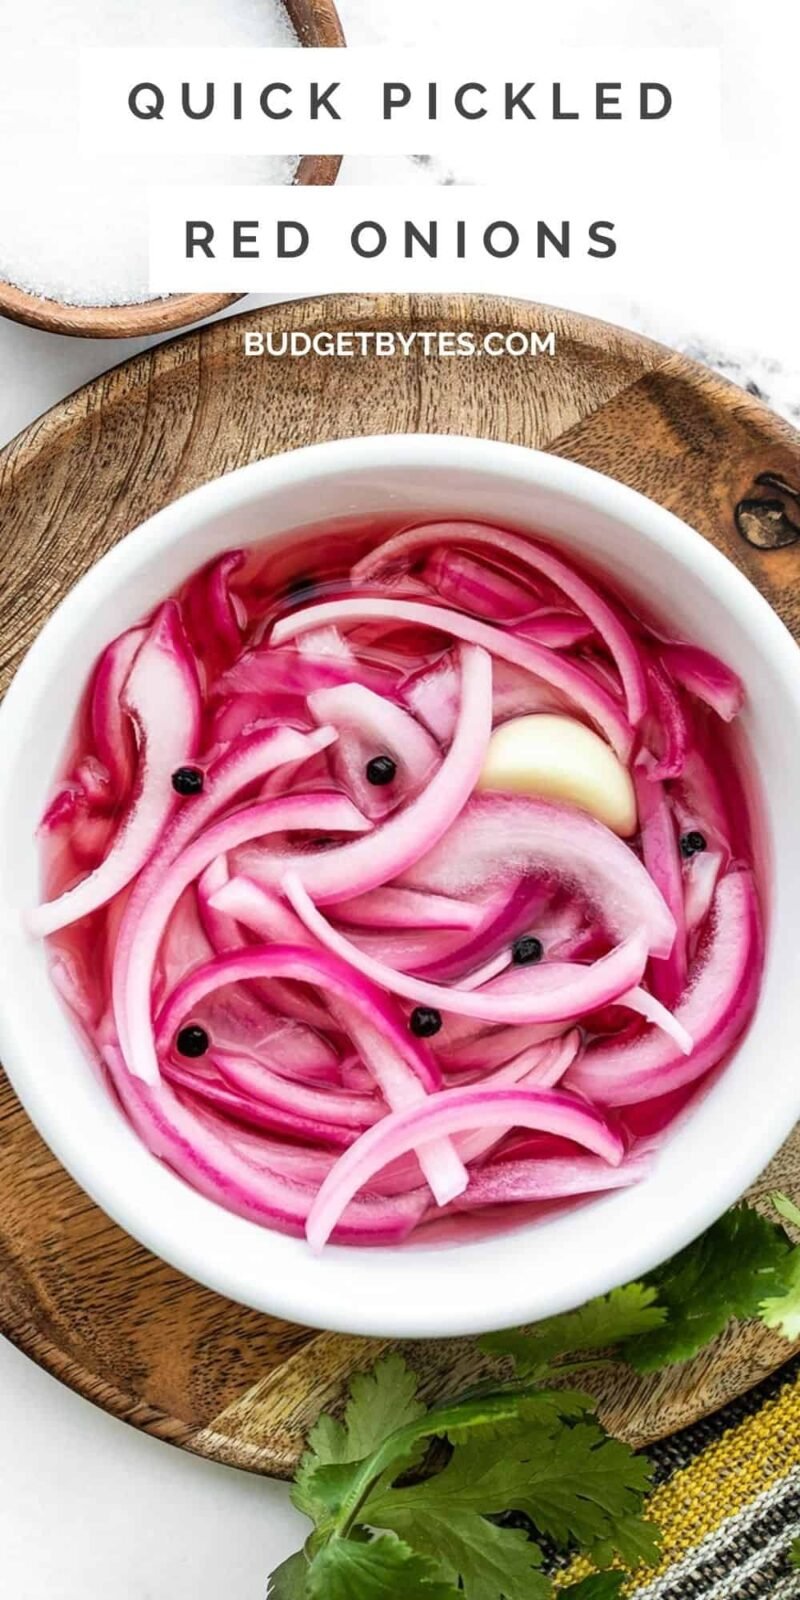 Overhead view of a bowl of pickled red onions, title text at the top